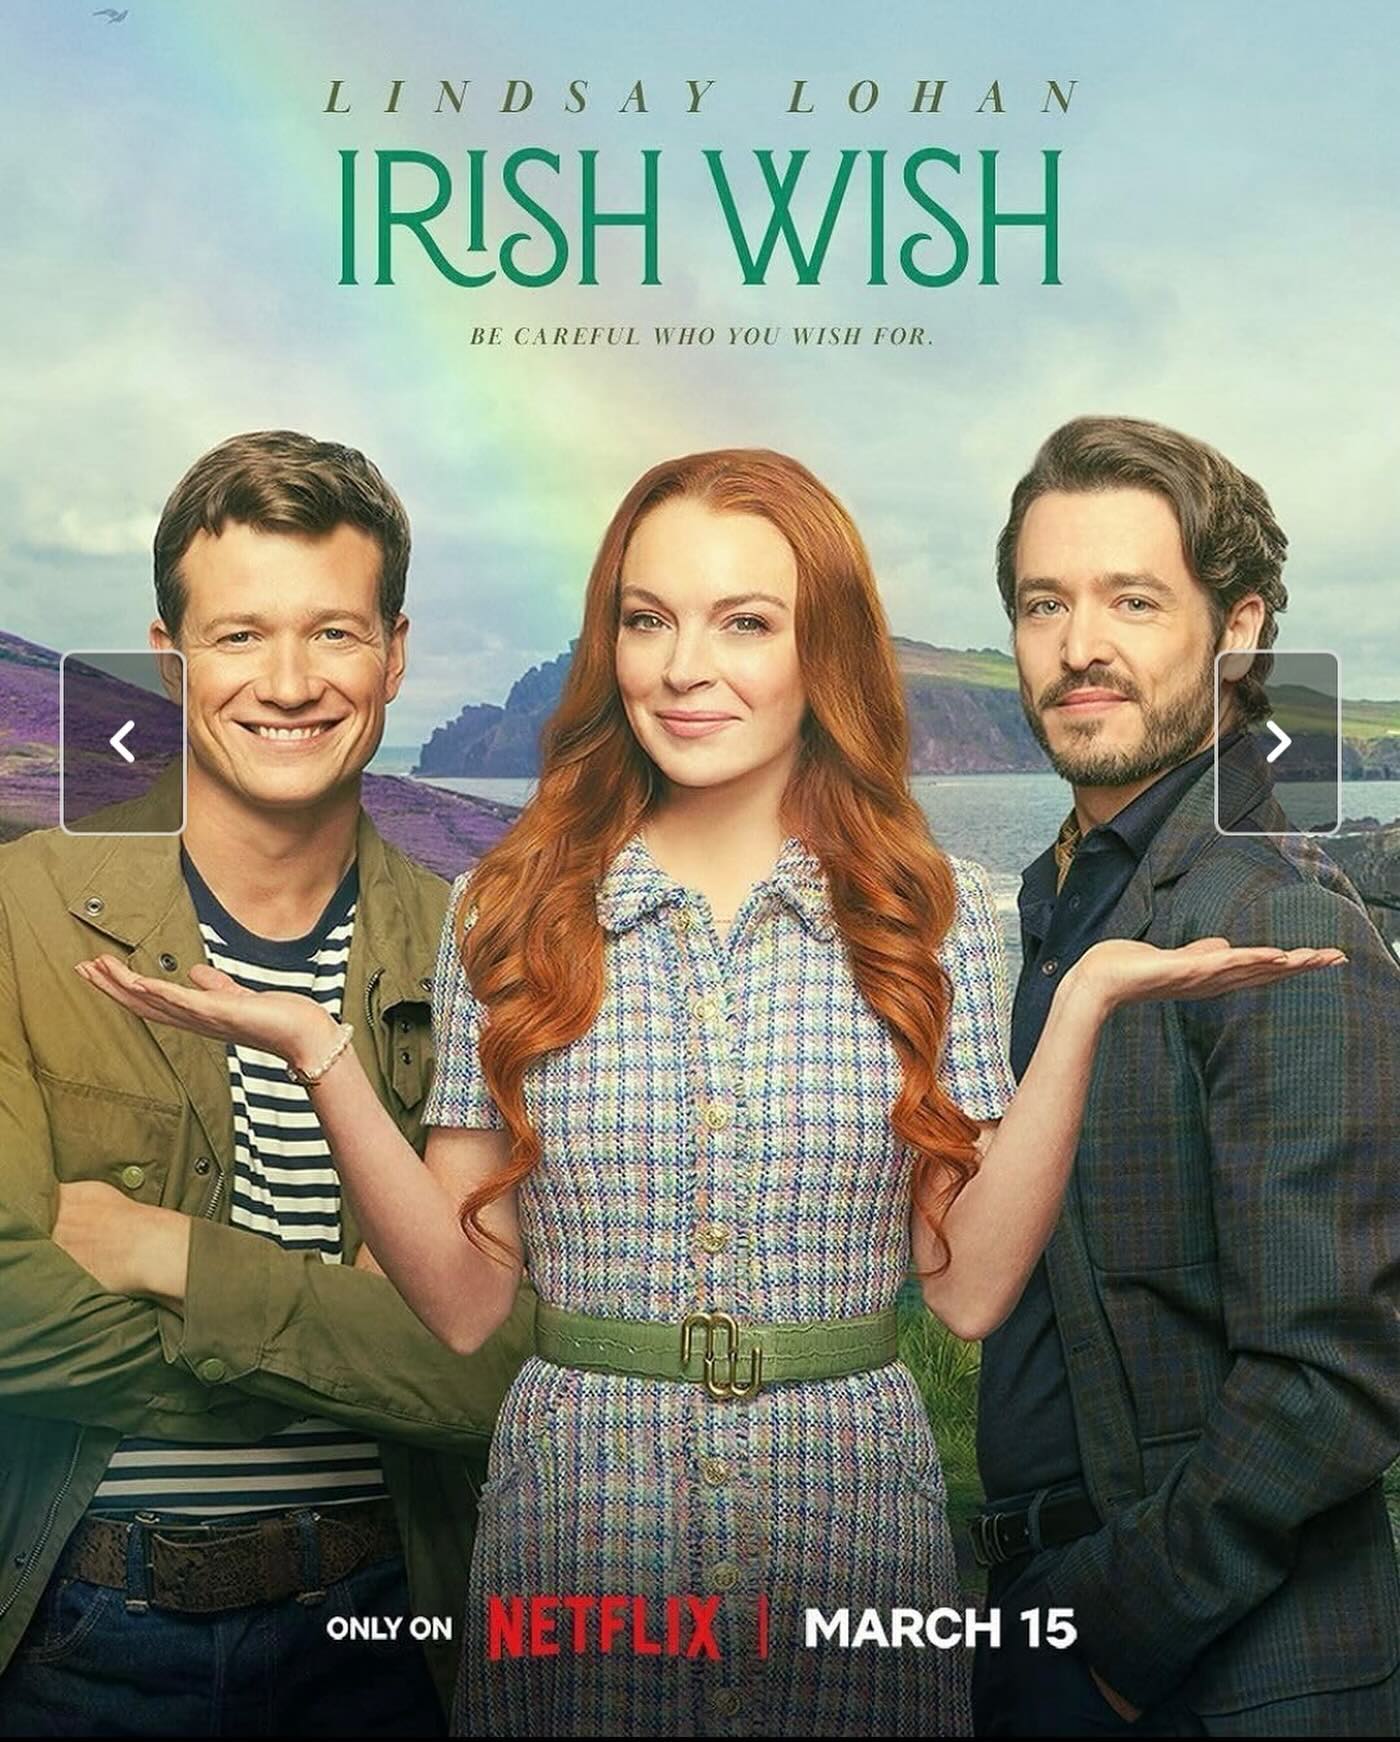 Just watched the perfect St. Patrick’s Day weekend movie! Thank@ypu @lindsaylohan ❤️🍀☘️